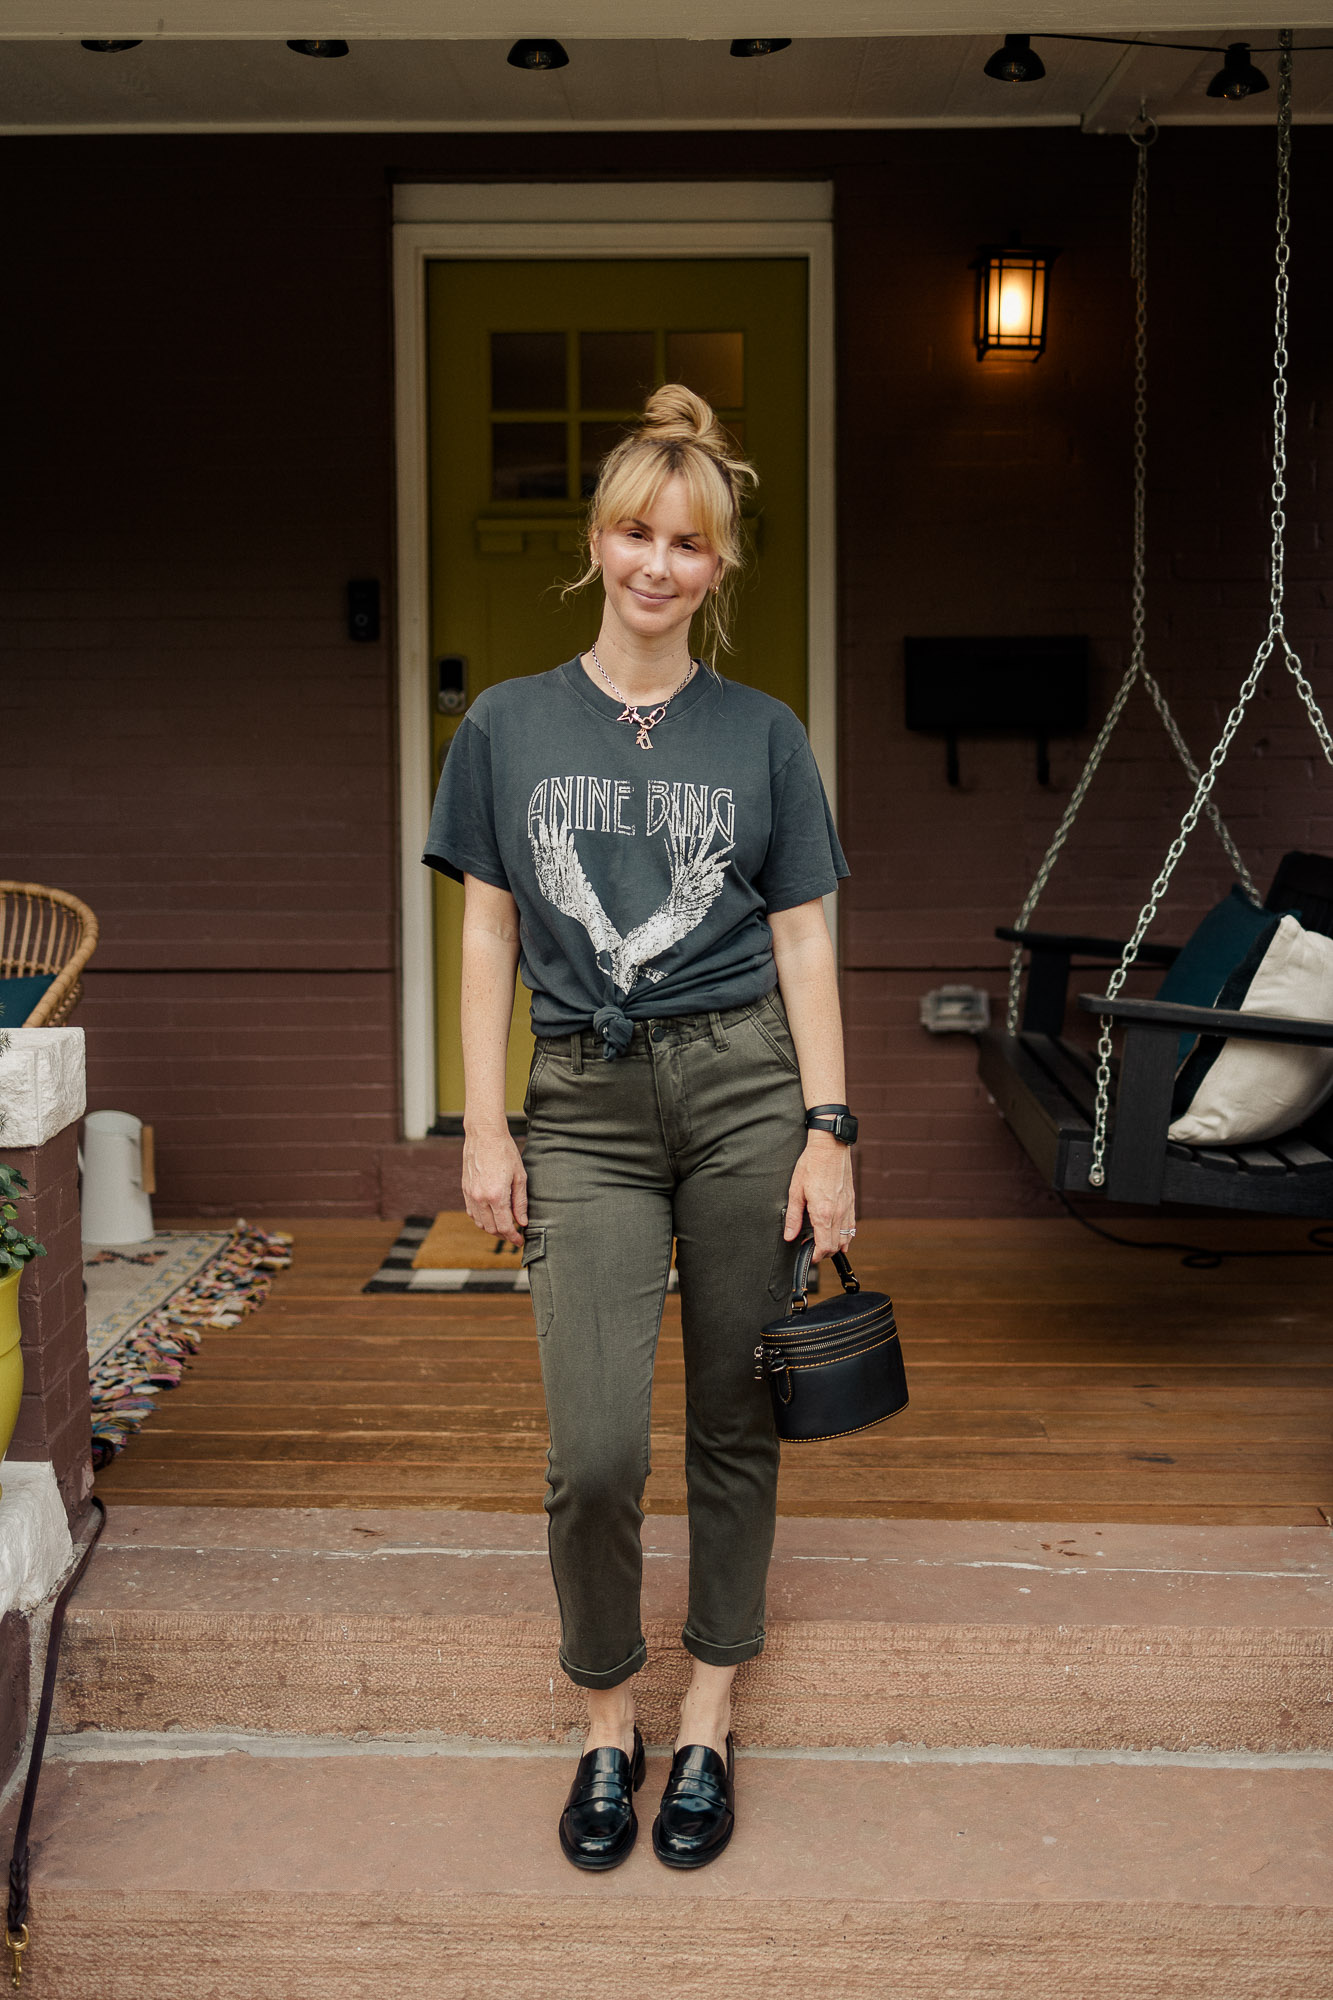 Wearing the Anine Bing Lili tee in washed black with green paige utility pants and black Rag and Bone loafers.